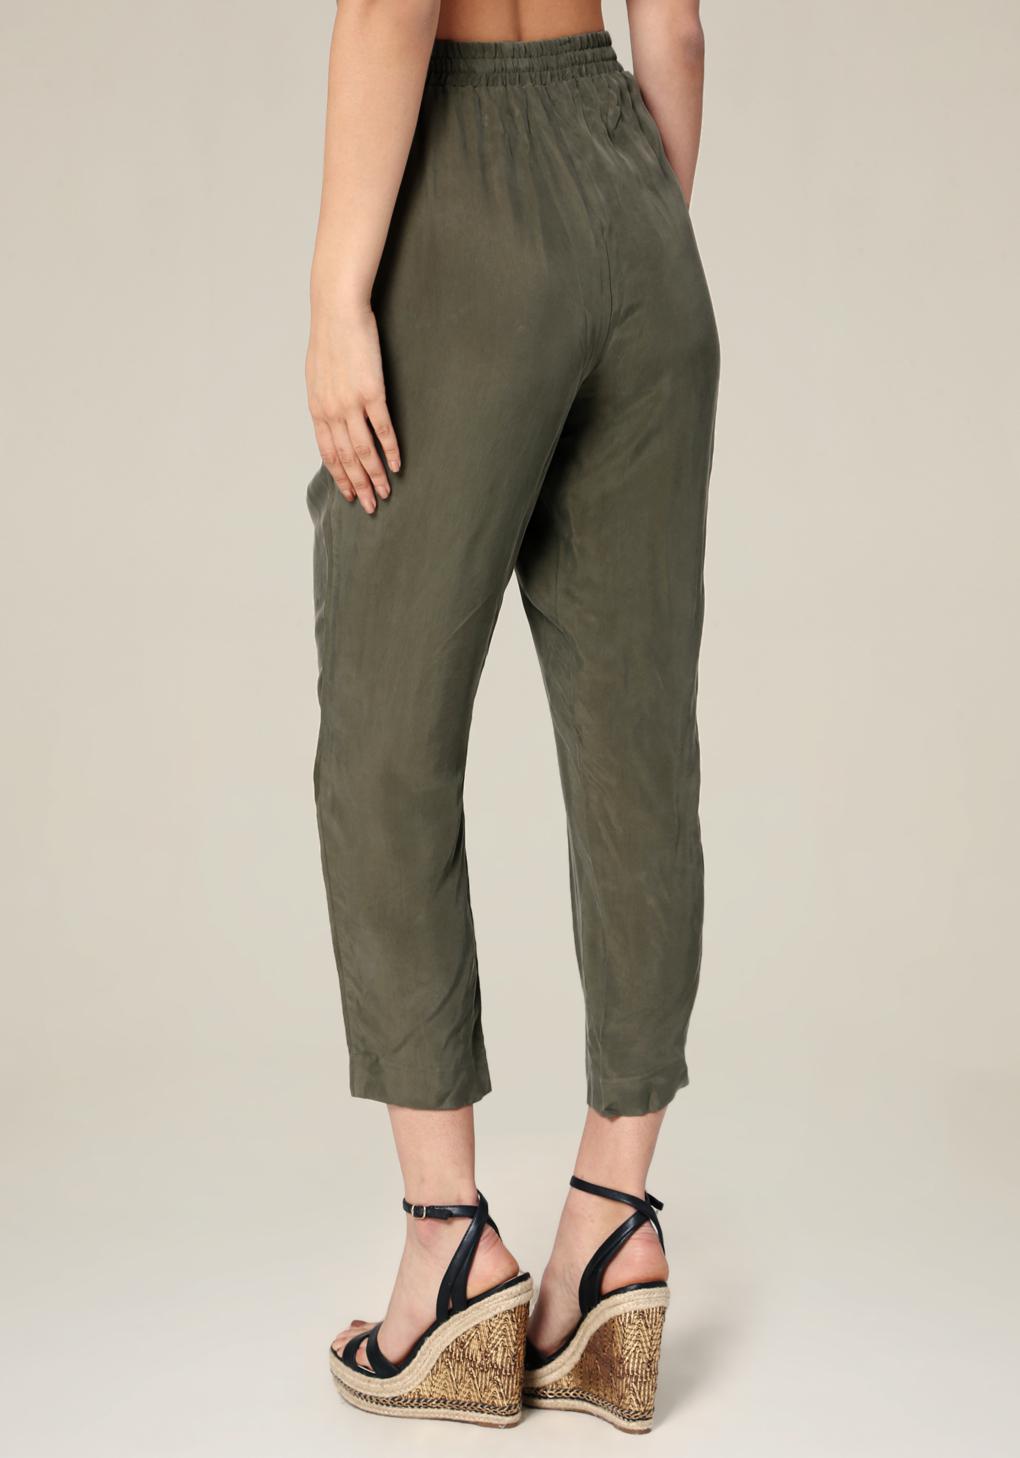 Bebe Synthetic Cupro Jogger Pants in Green - Lyst